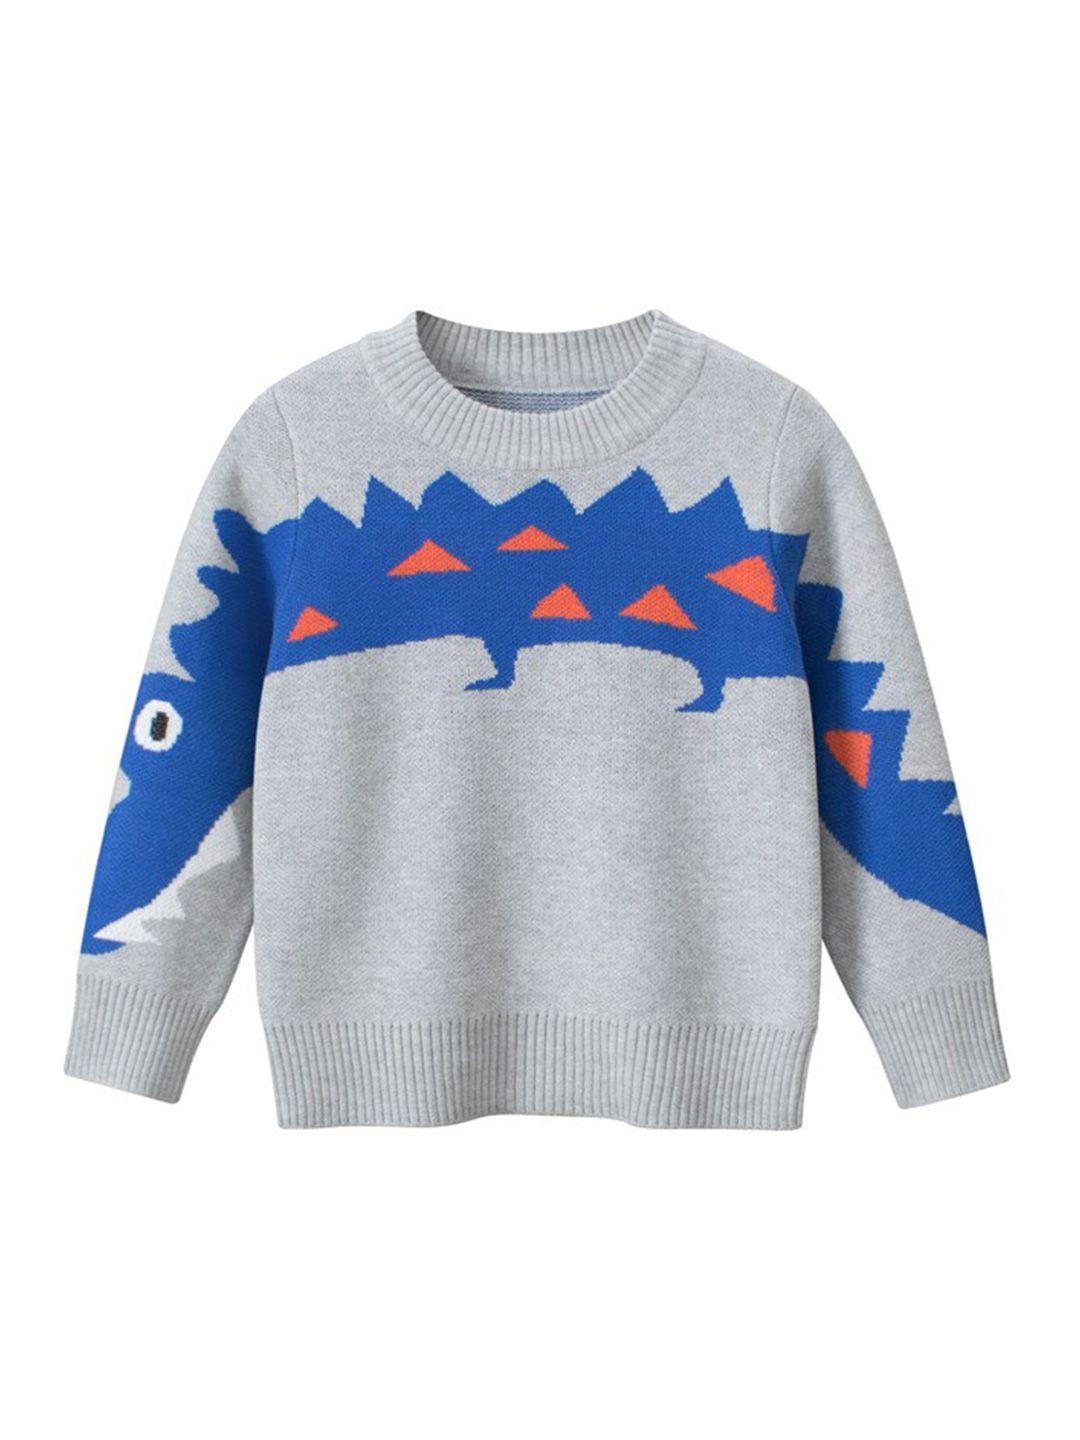 stylecast boys grey graphic printed pullover cotton sweater